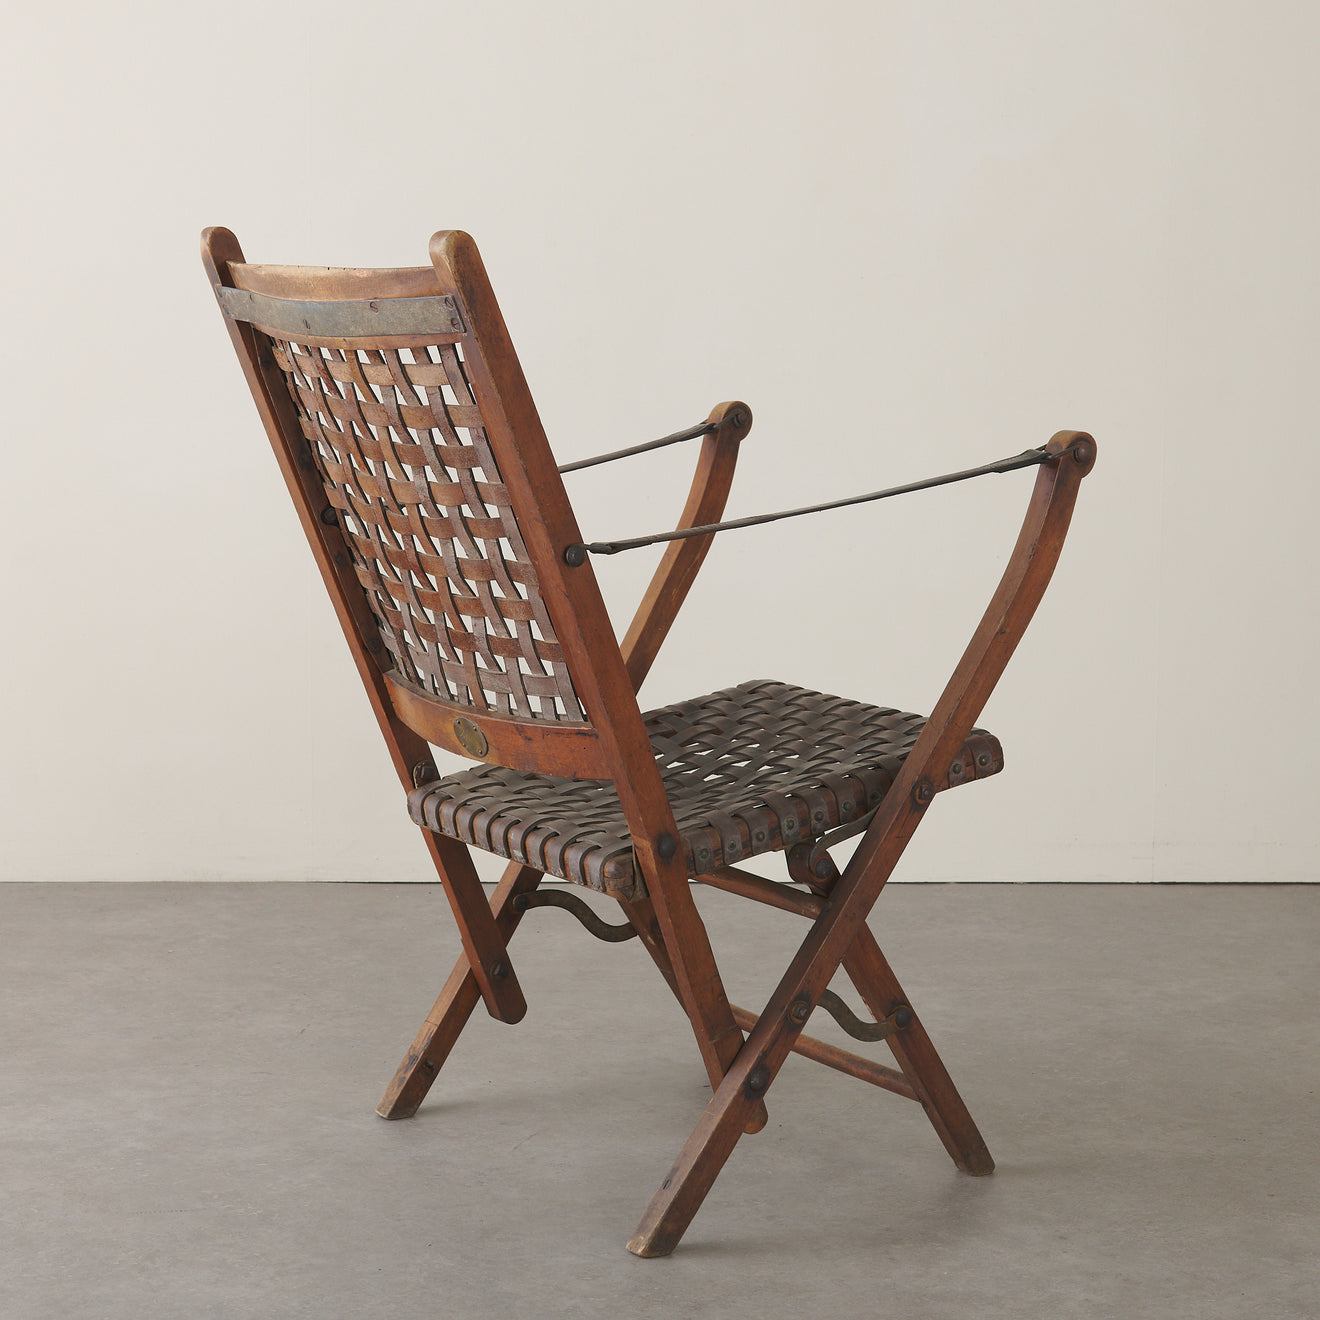 LEATHER WEBBED FOLDING CAMPAIGN CHAIR